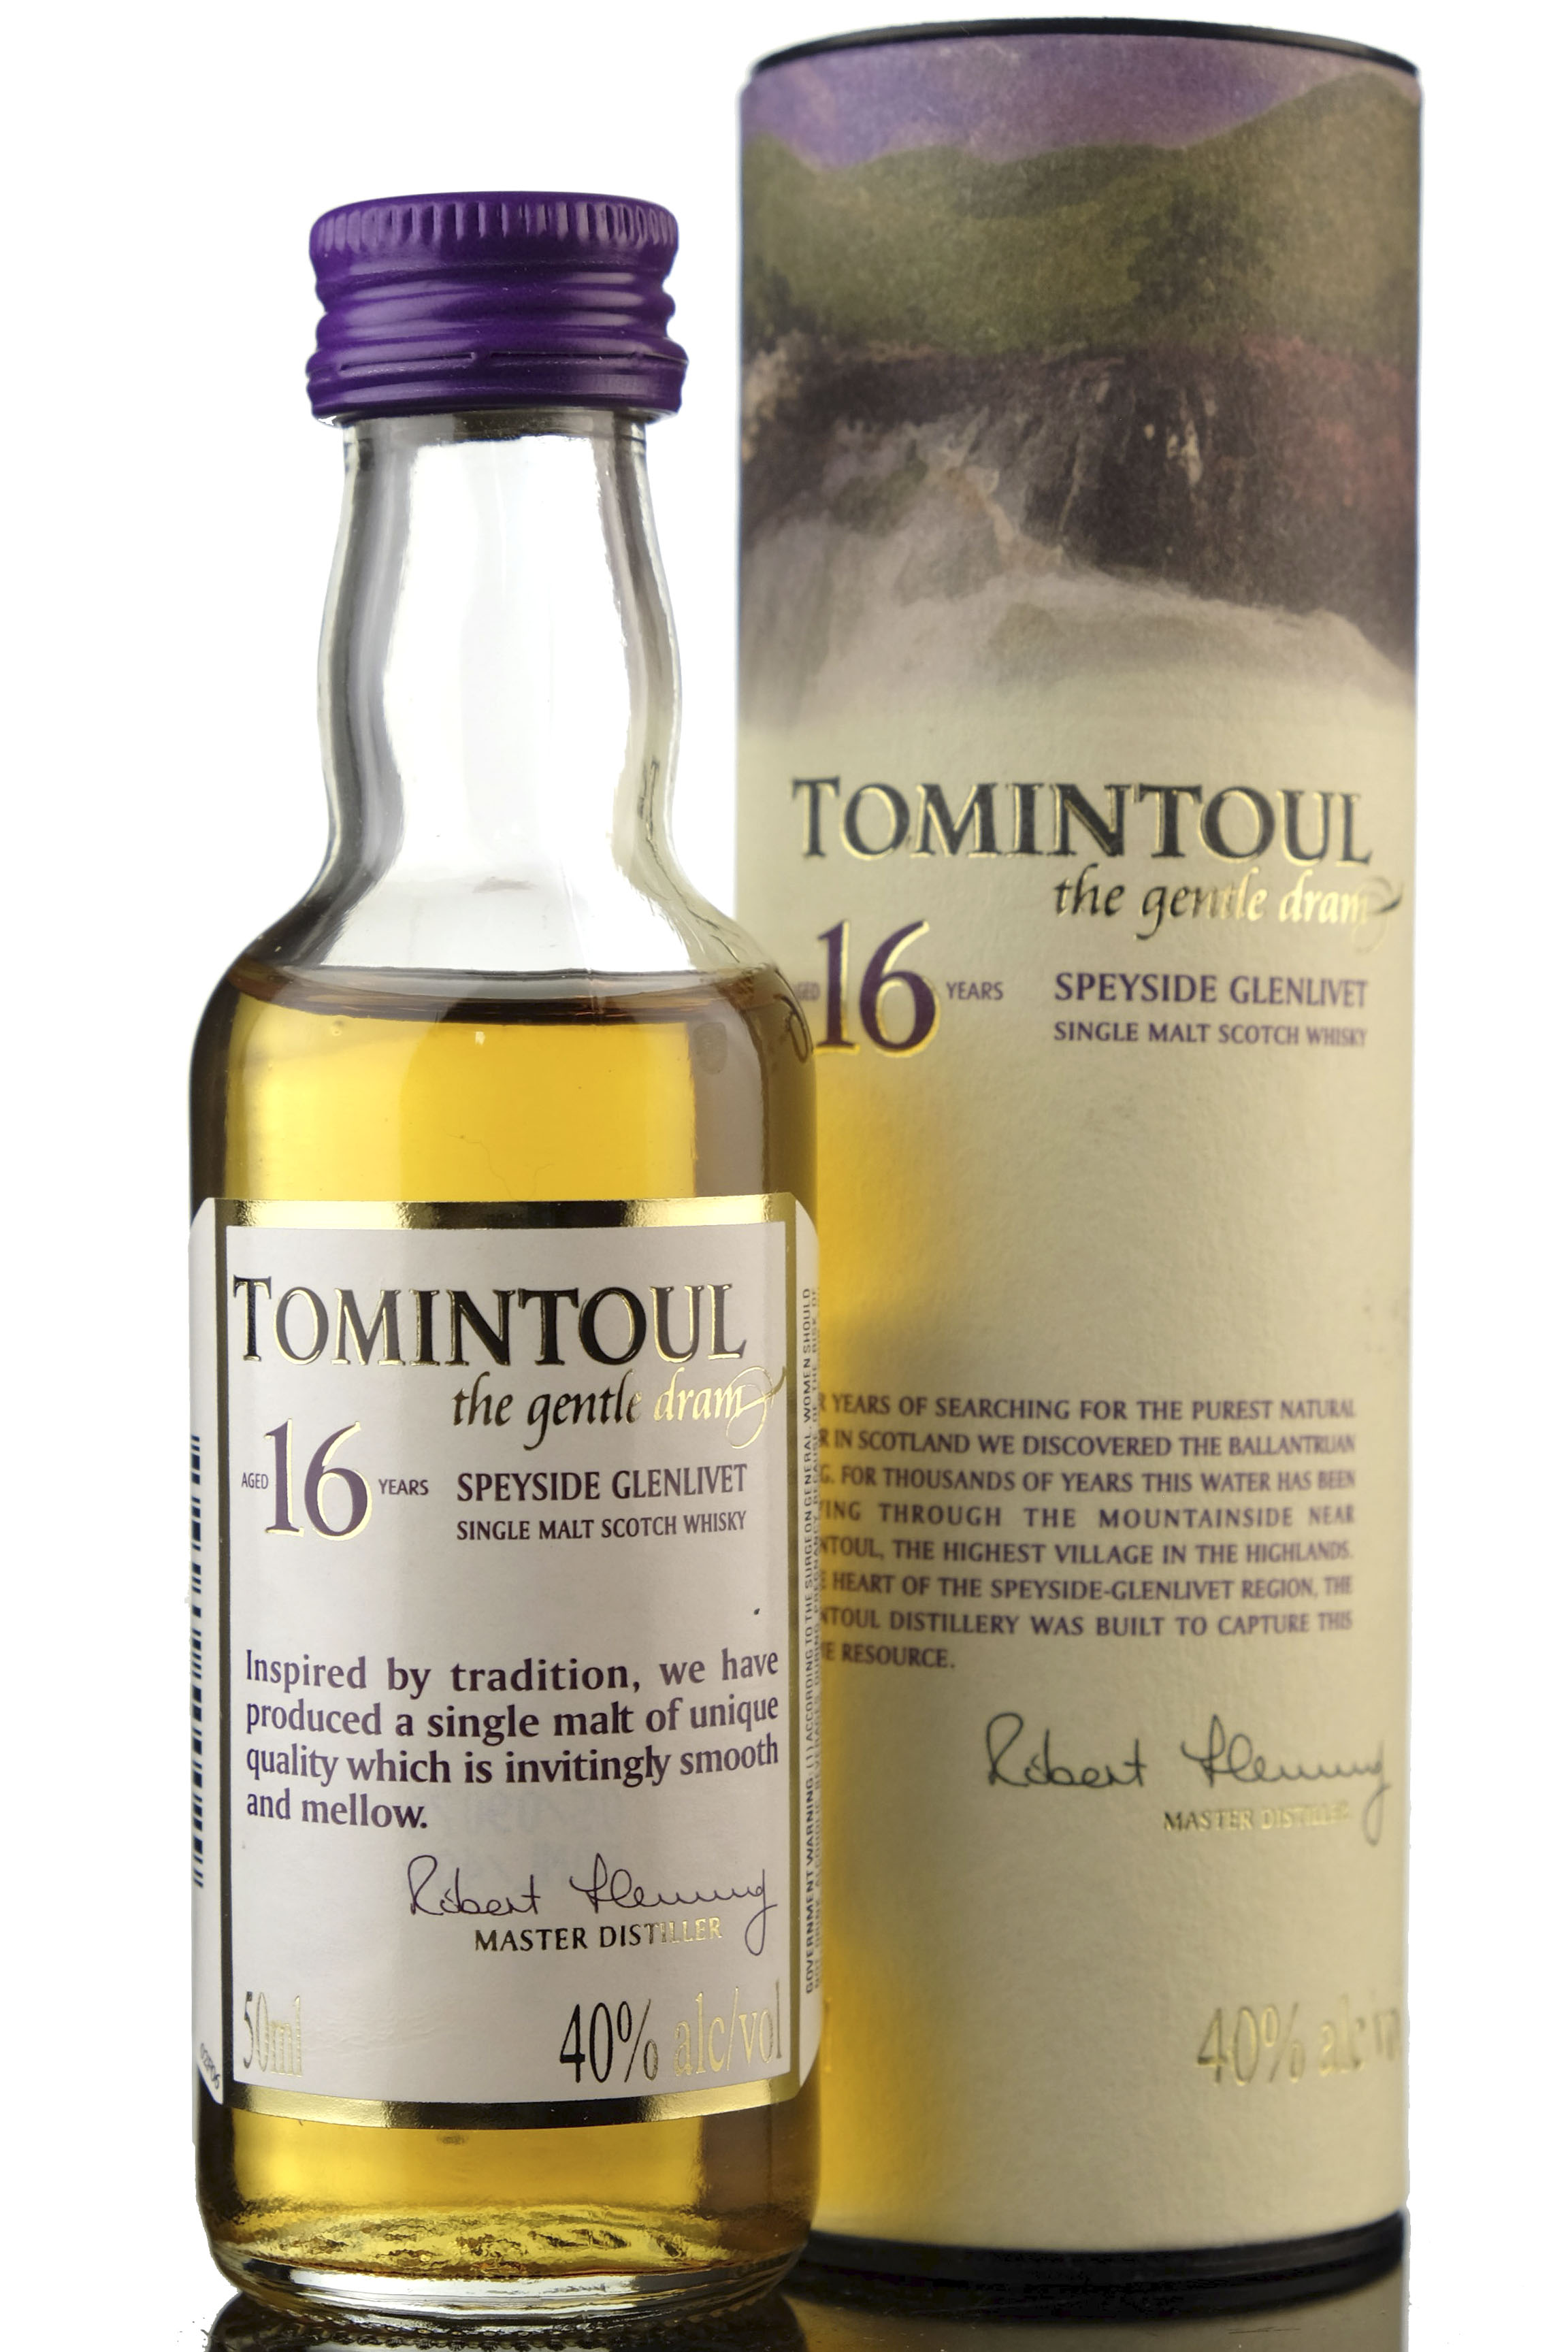 Tomintoul 16 Year Old - The Gentle Dram Miniature